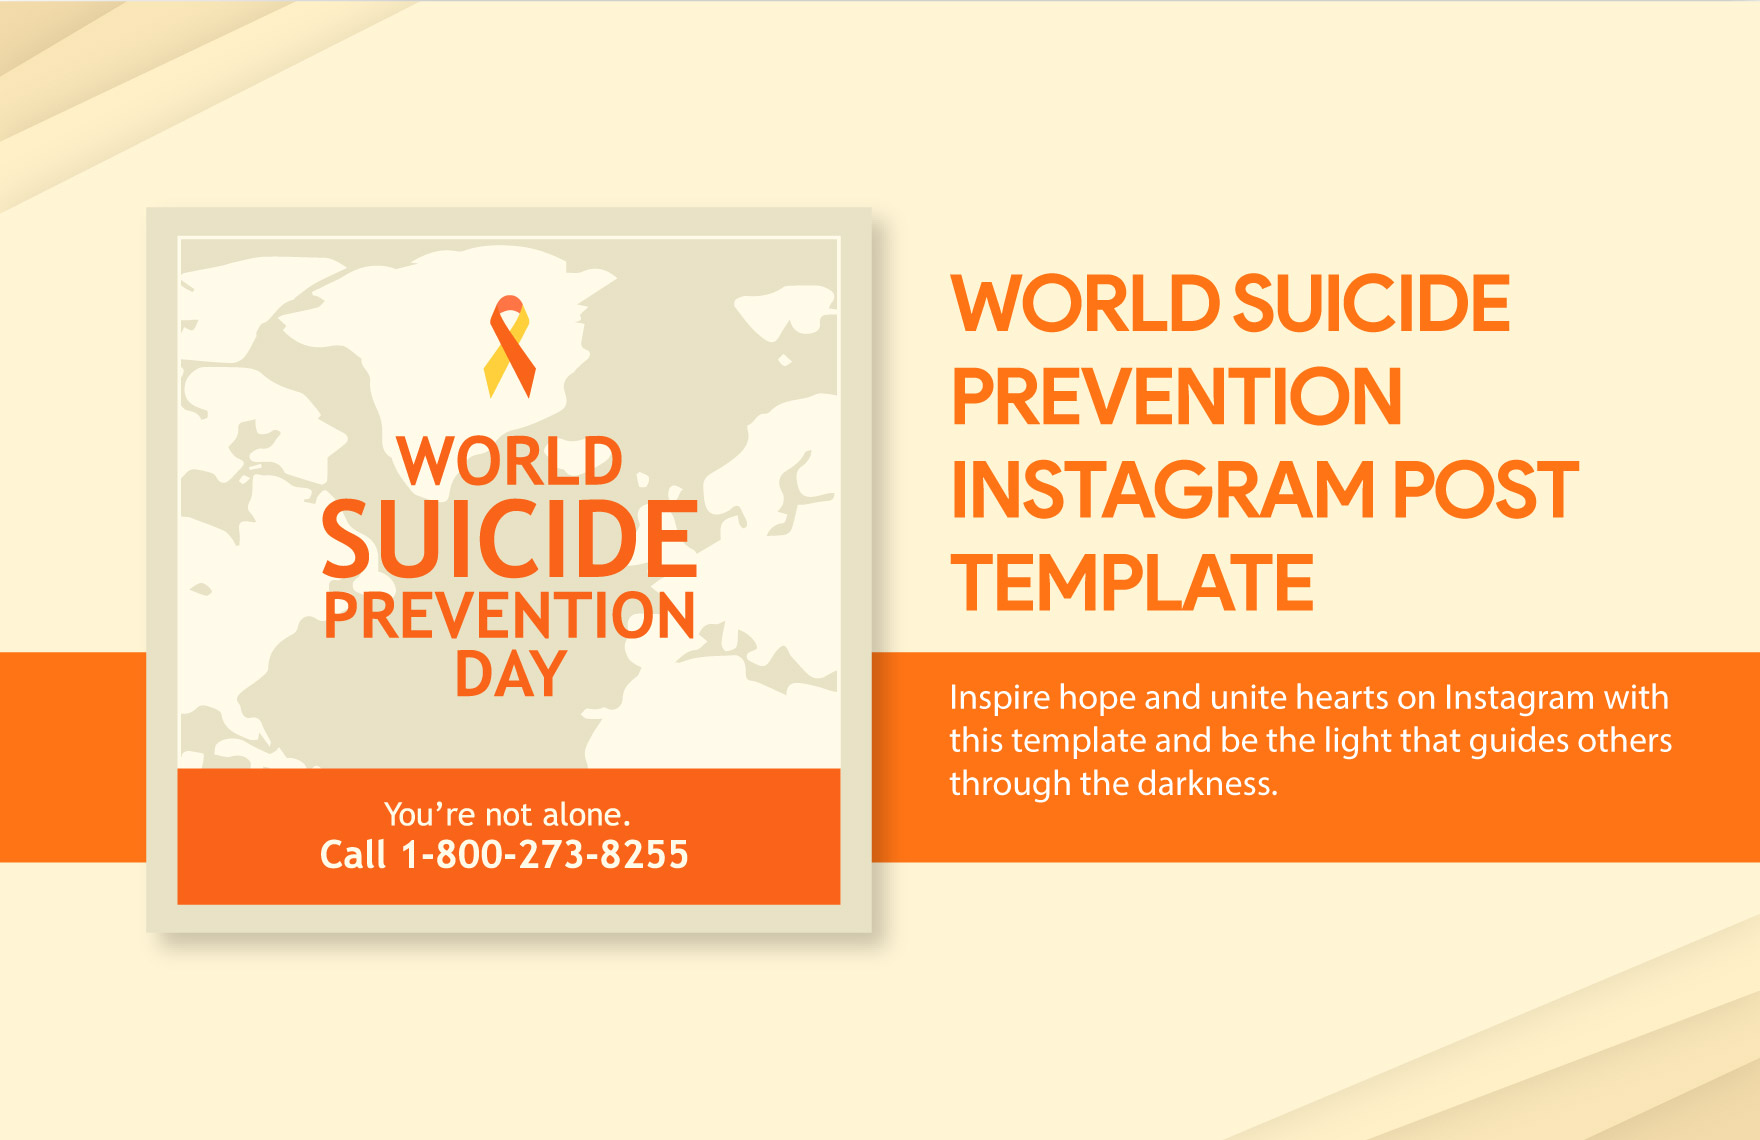 Free World Suicide Prevention Day Instagram Post Template in Illustrator, PSD, PNG